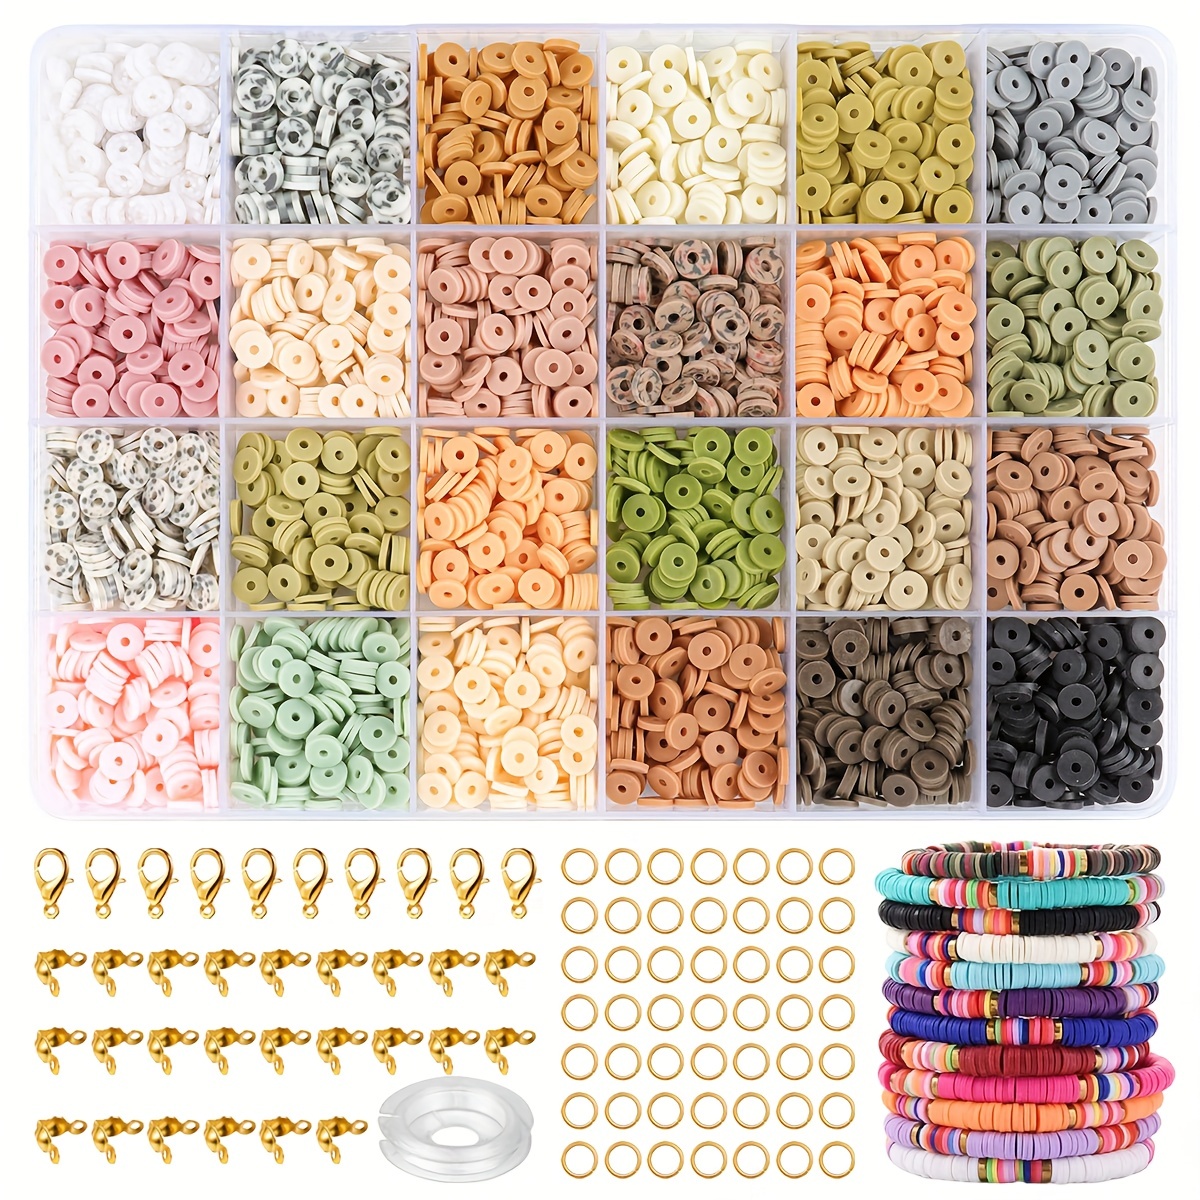 Boho Clay Beads Bracelet Kit Friendship Bracelet Making for WomenGolden  Beads Pink White Clay Beads Kit for DIY Jewelry Making - AliExpress